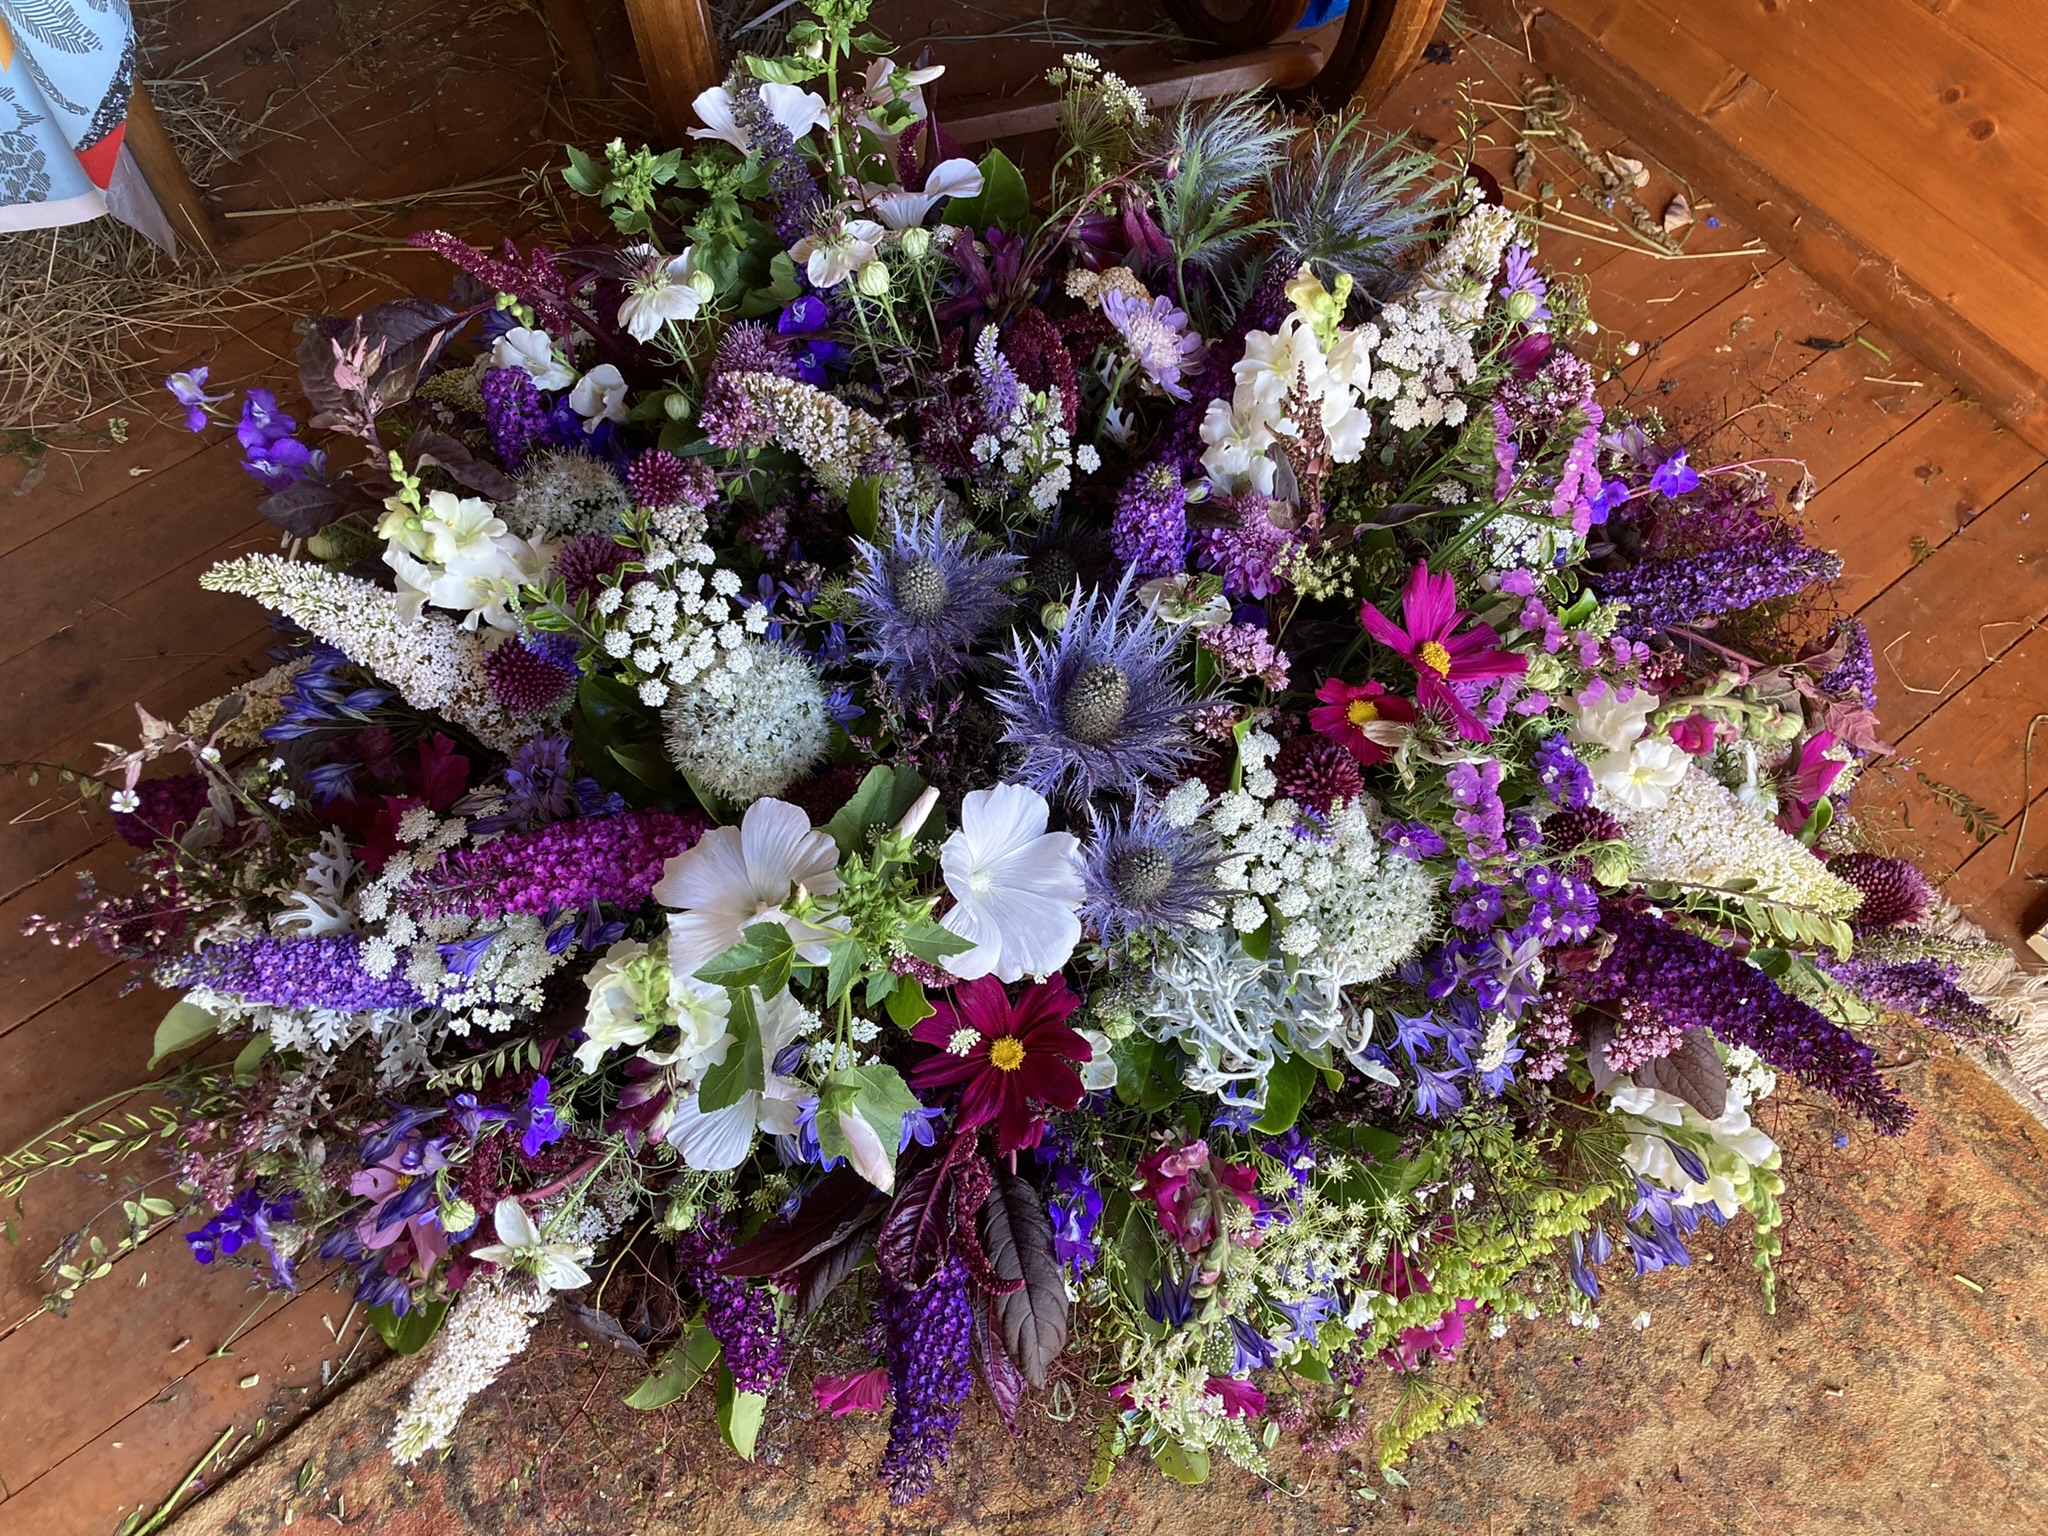 A beautiful example of a seasonal floral funeral tribute by Sammie Halll, including buddleia, cosmos and eryngium